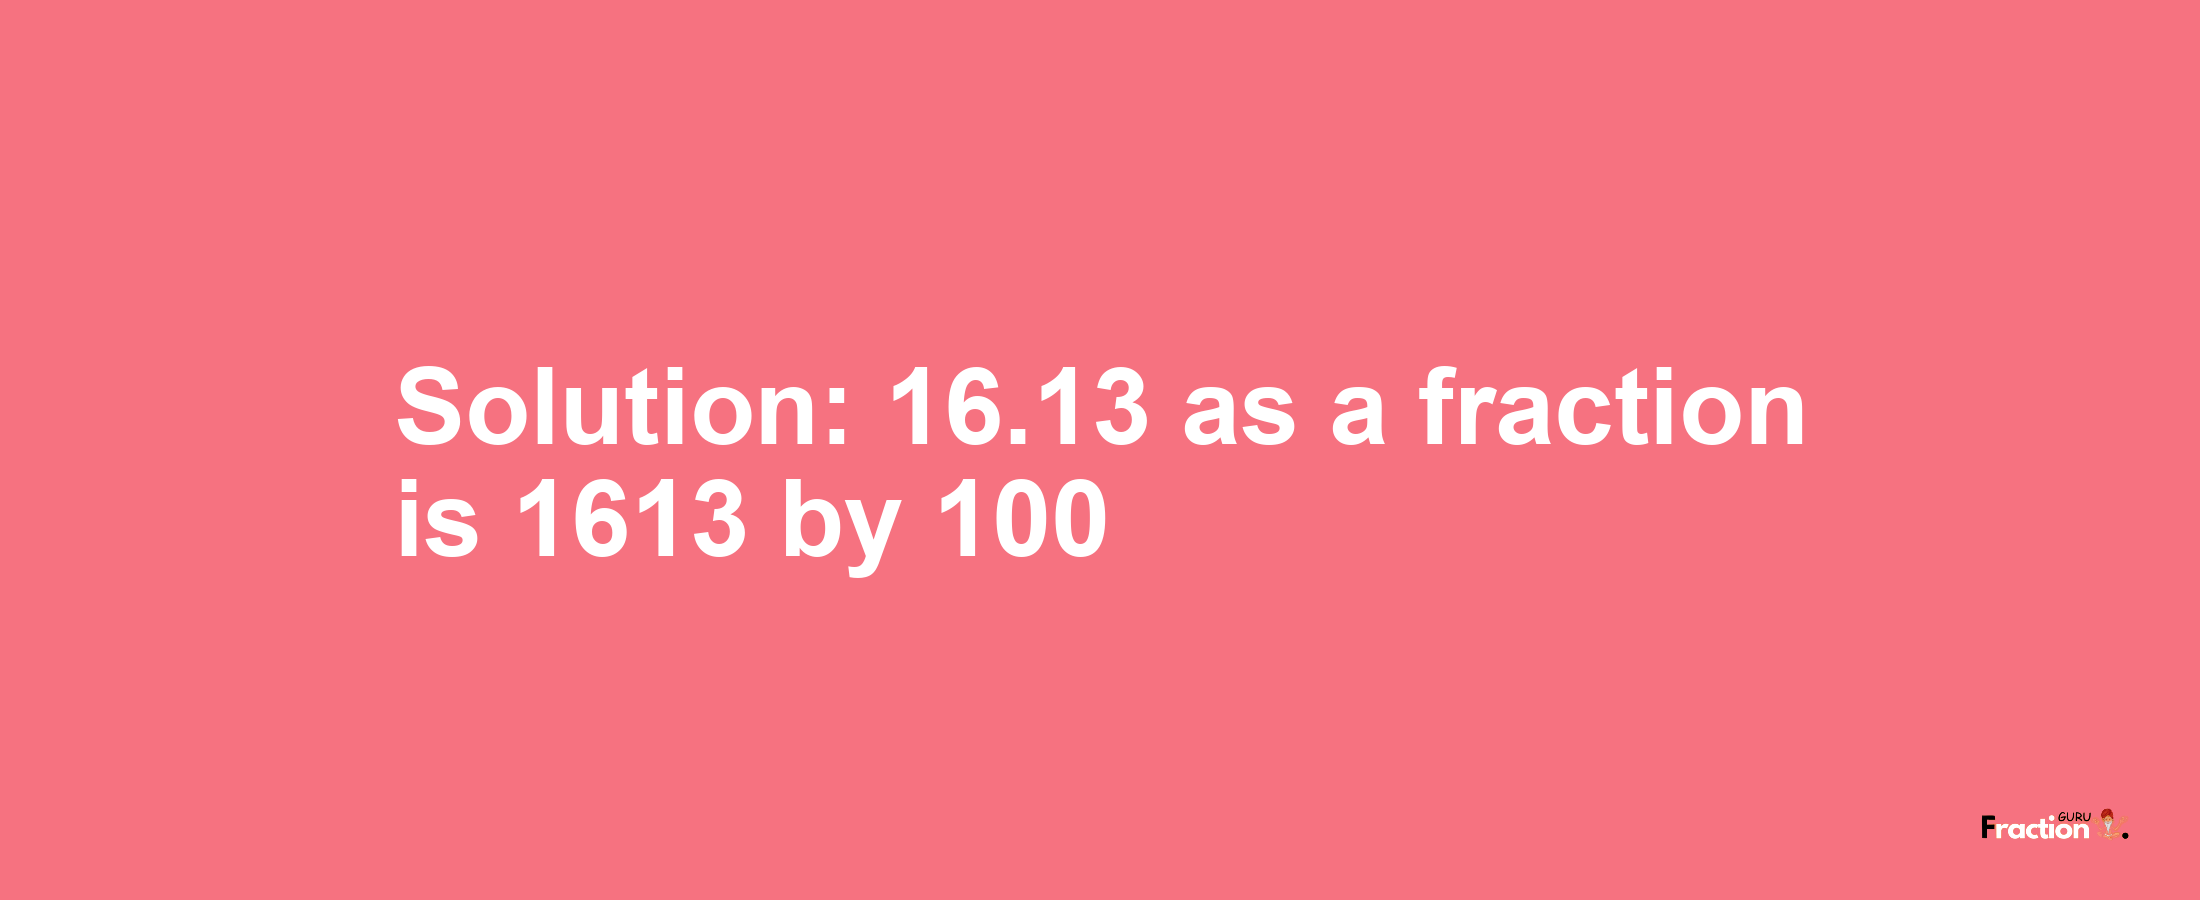 Solution:16.13 as a fraction is 1613/100